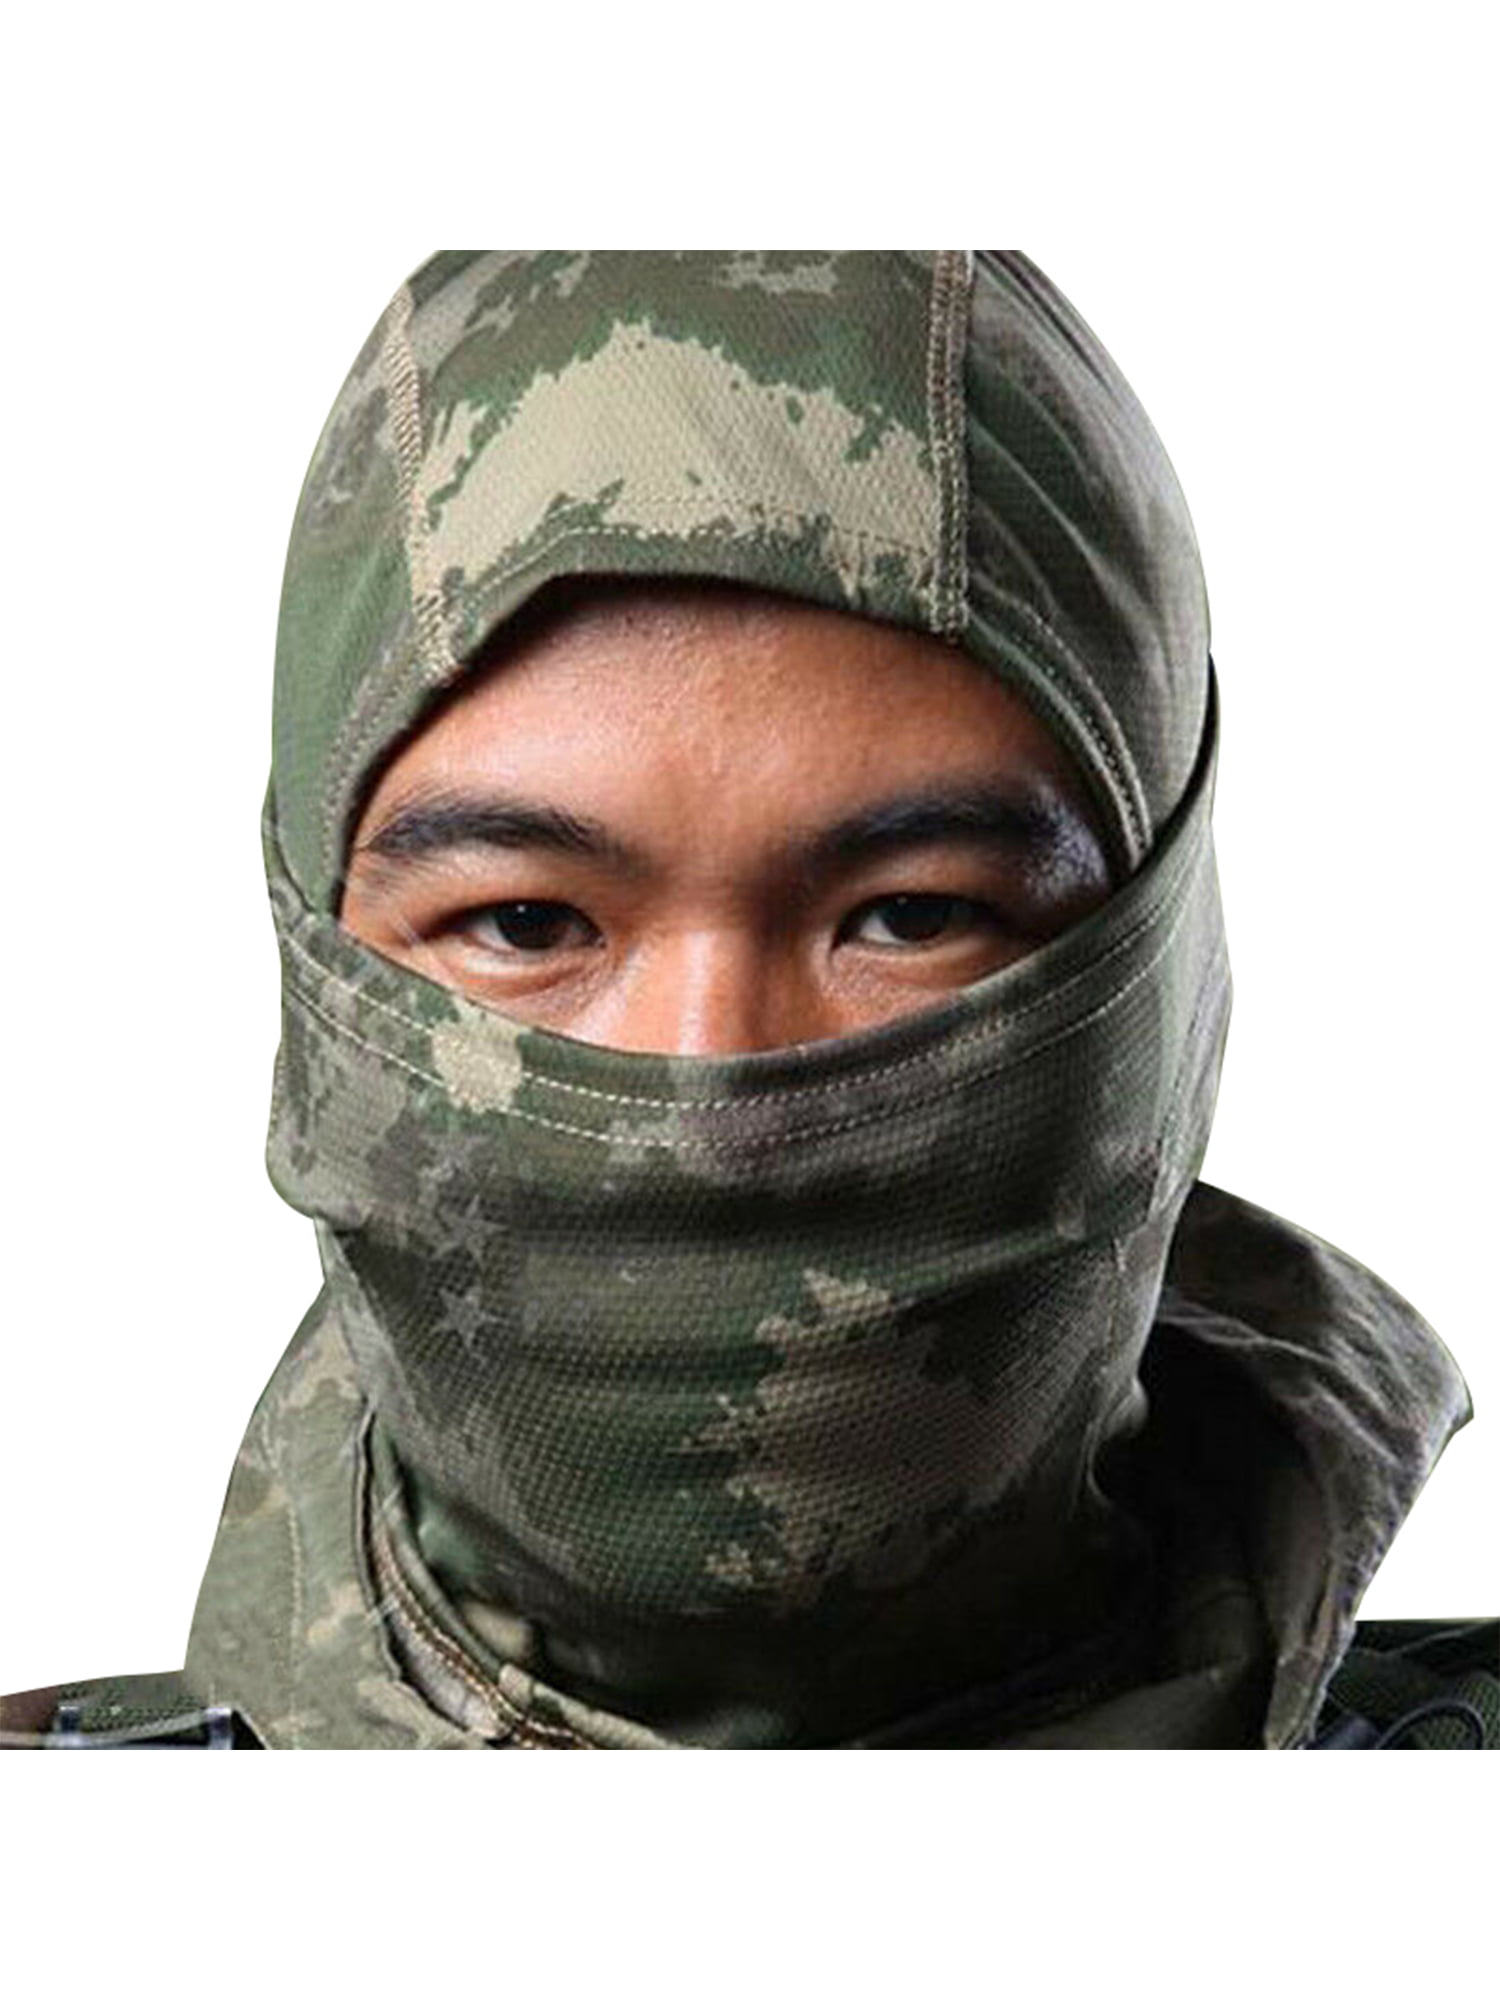 Hunt Bike Details about   Lot of 12 US Military Extreme Cold Face Mask Balaclava Hood w/Tails 